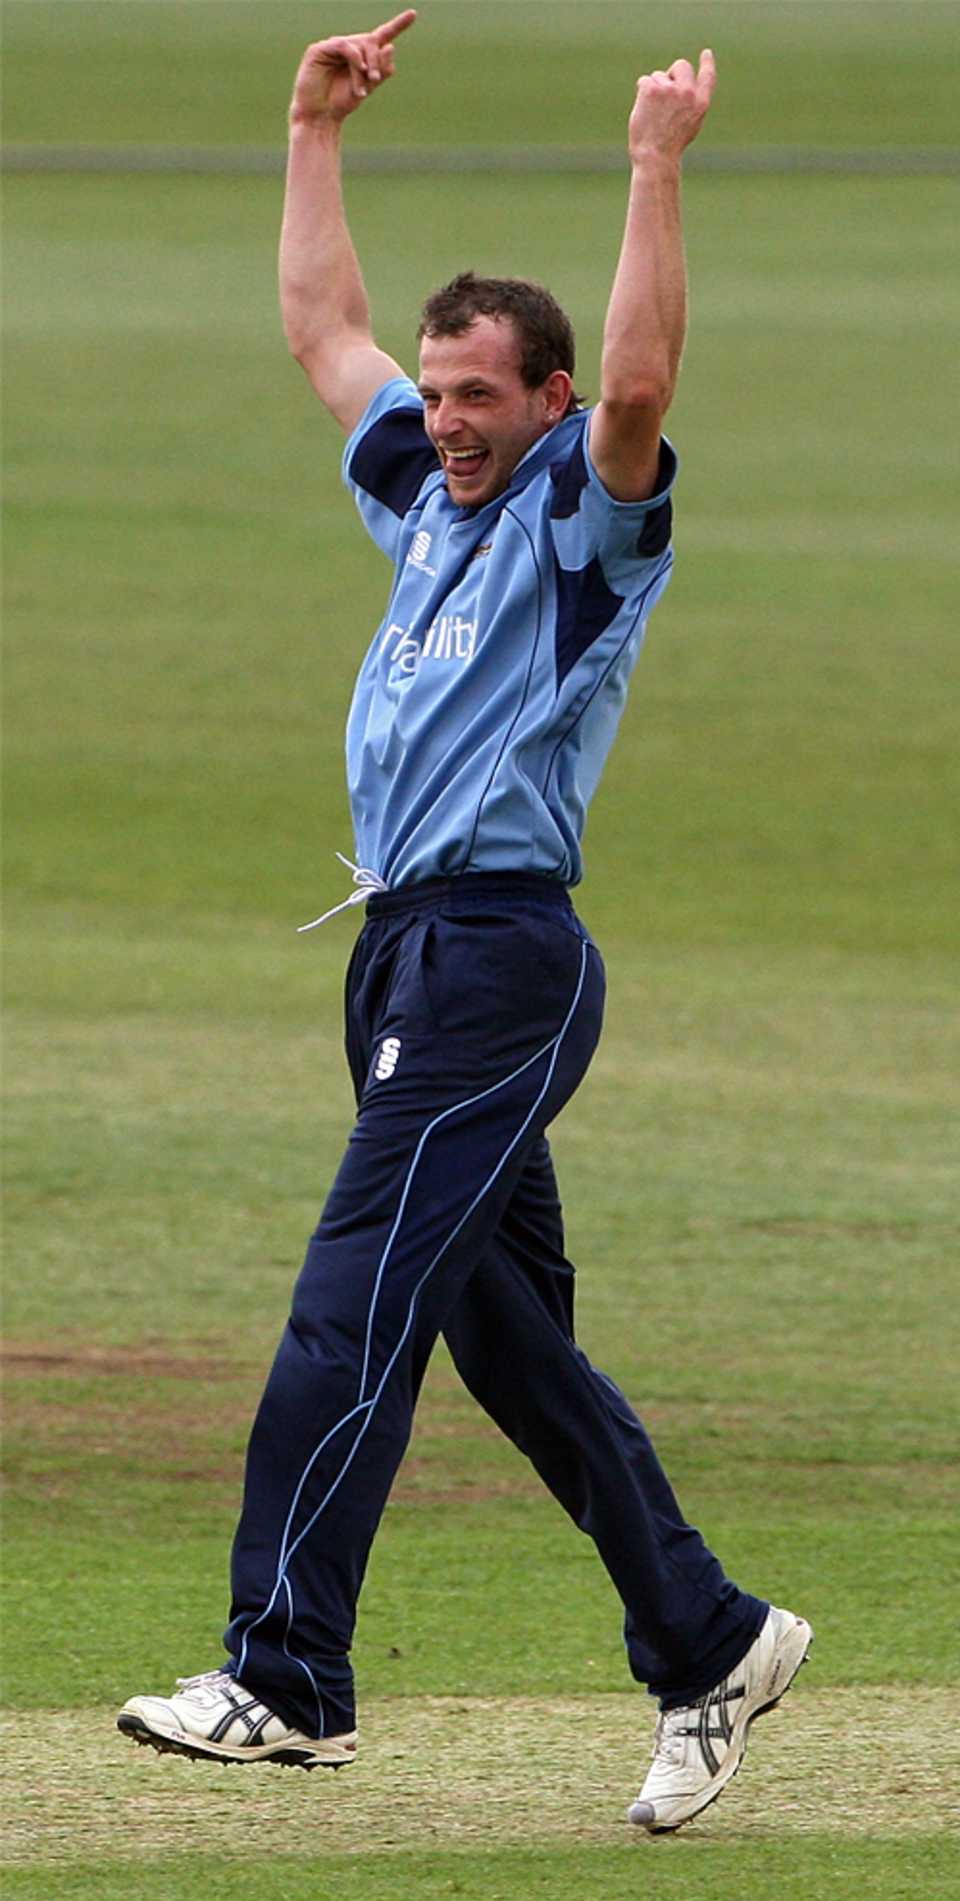 Graham Wagg celebrates, as did the rest of his team on beating Lancashire